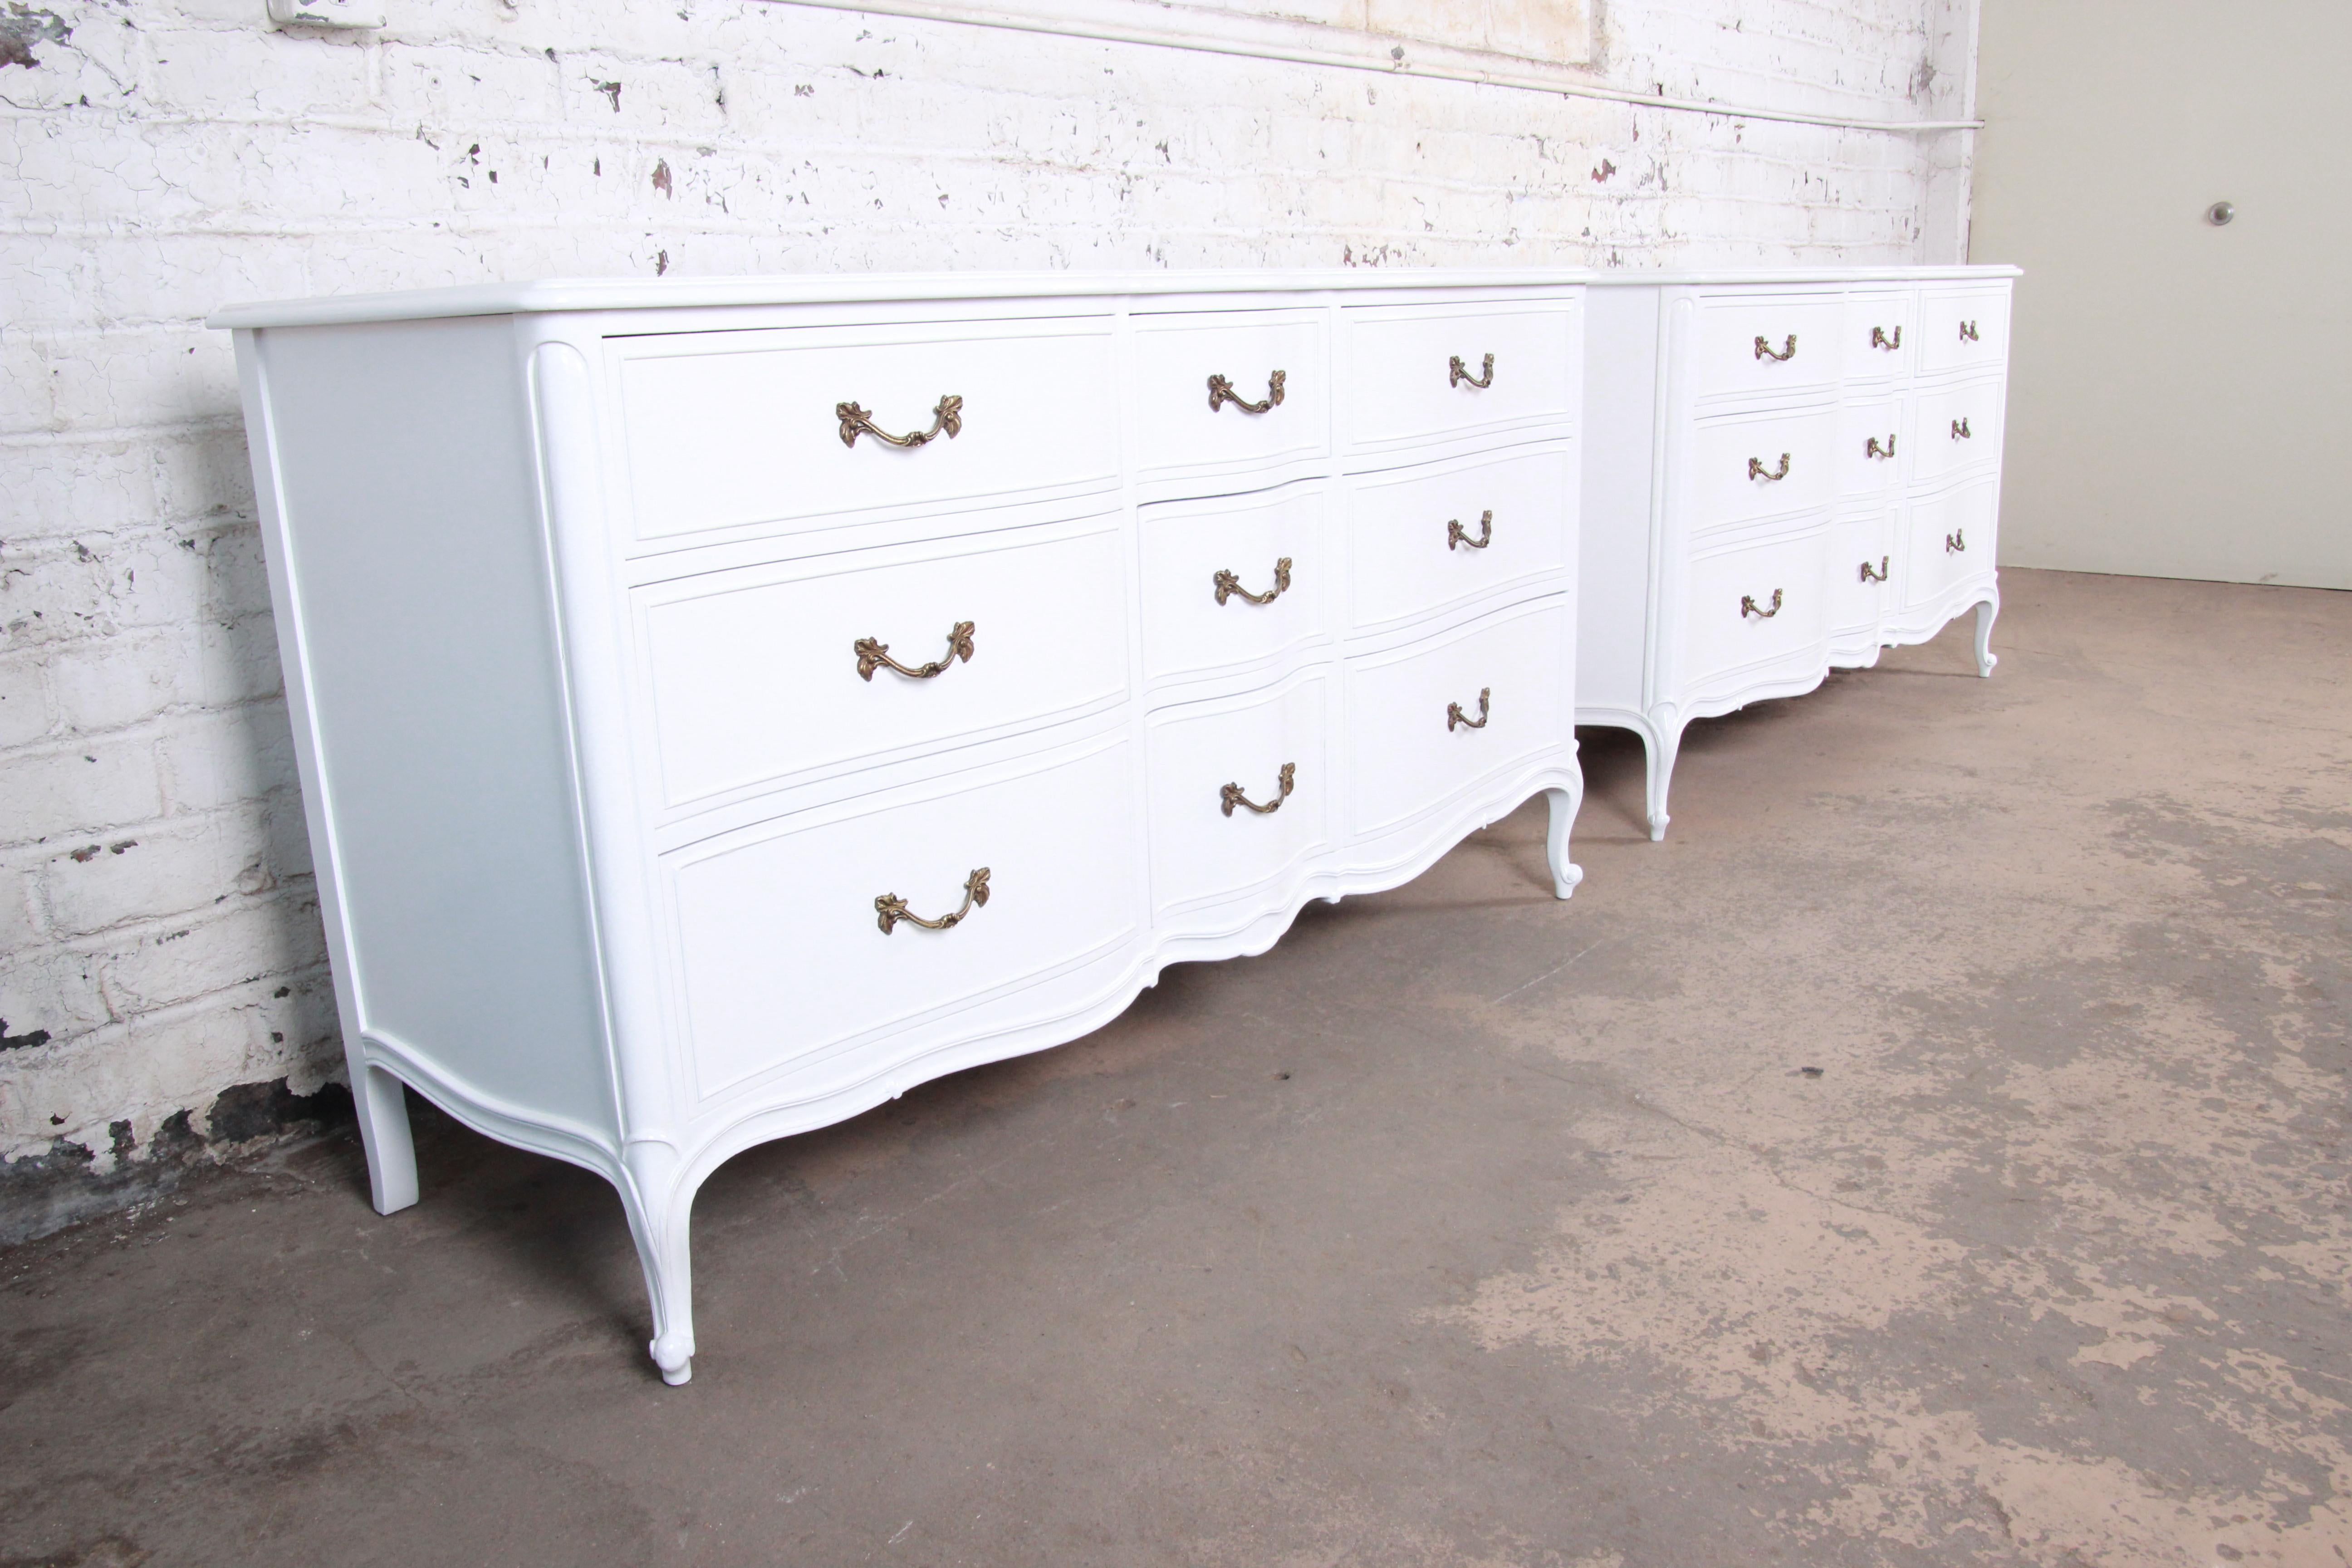 American French Provincial Louis XV White Lacquered Triple Dressers by Drexel, Refinished